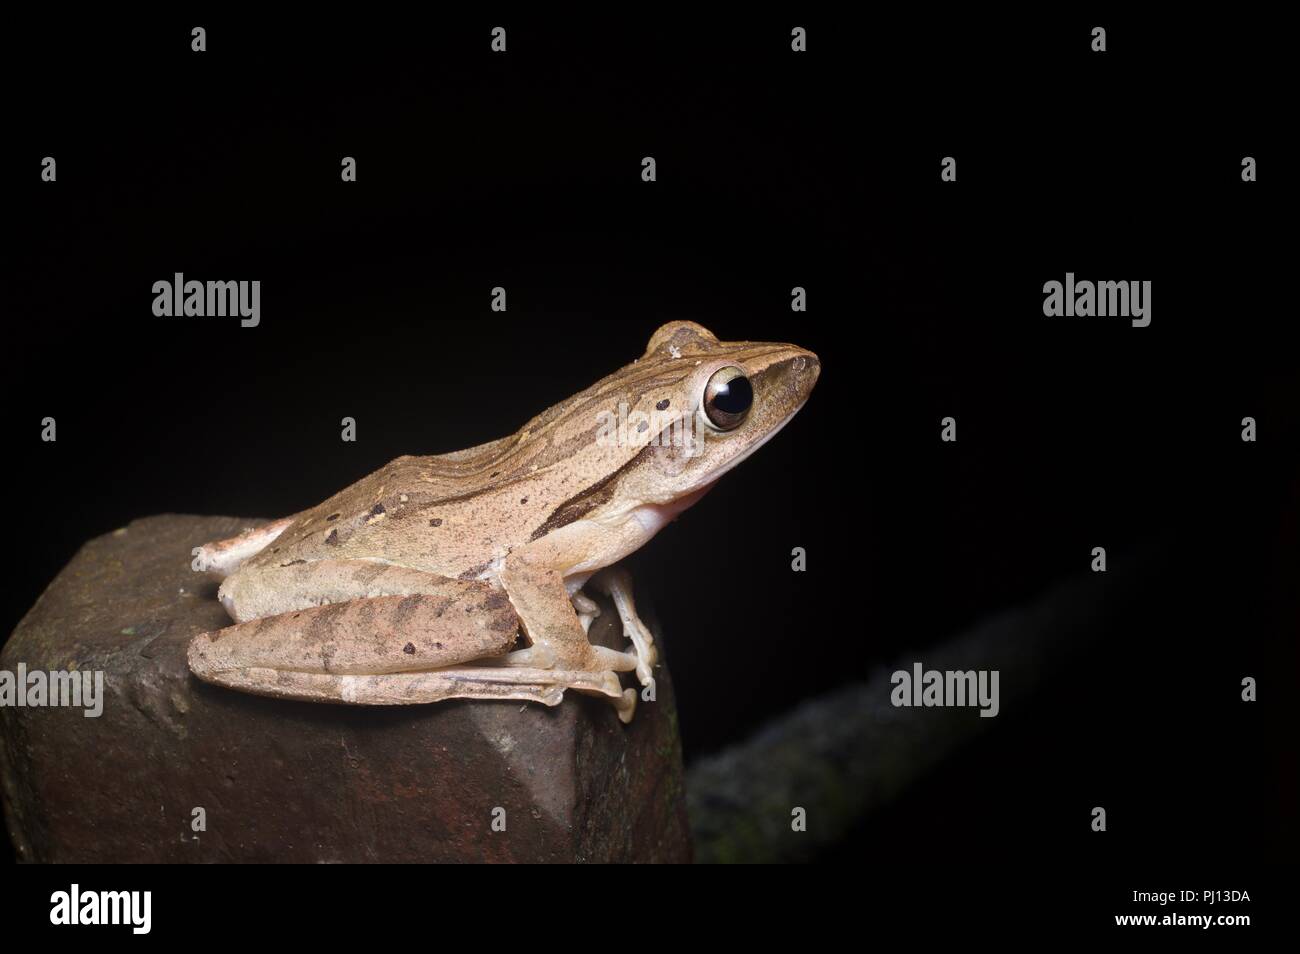 A Four-lined Tree Frog (Polypedates leucomystax) perched on a rock in the rainforest of Kubah National Park, Sarawak, East Malaysia, Borneo Stock Photo